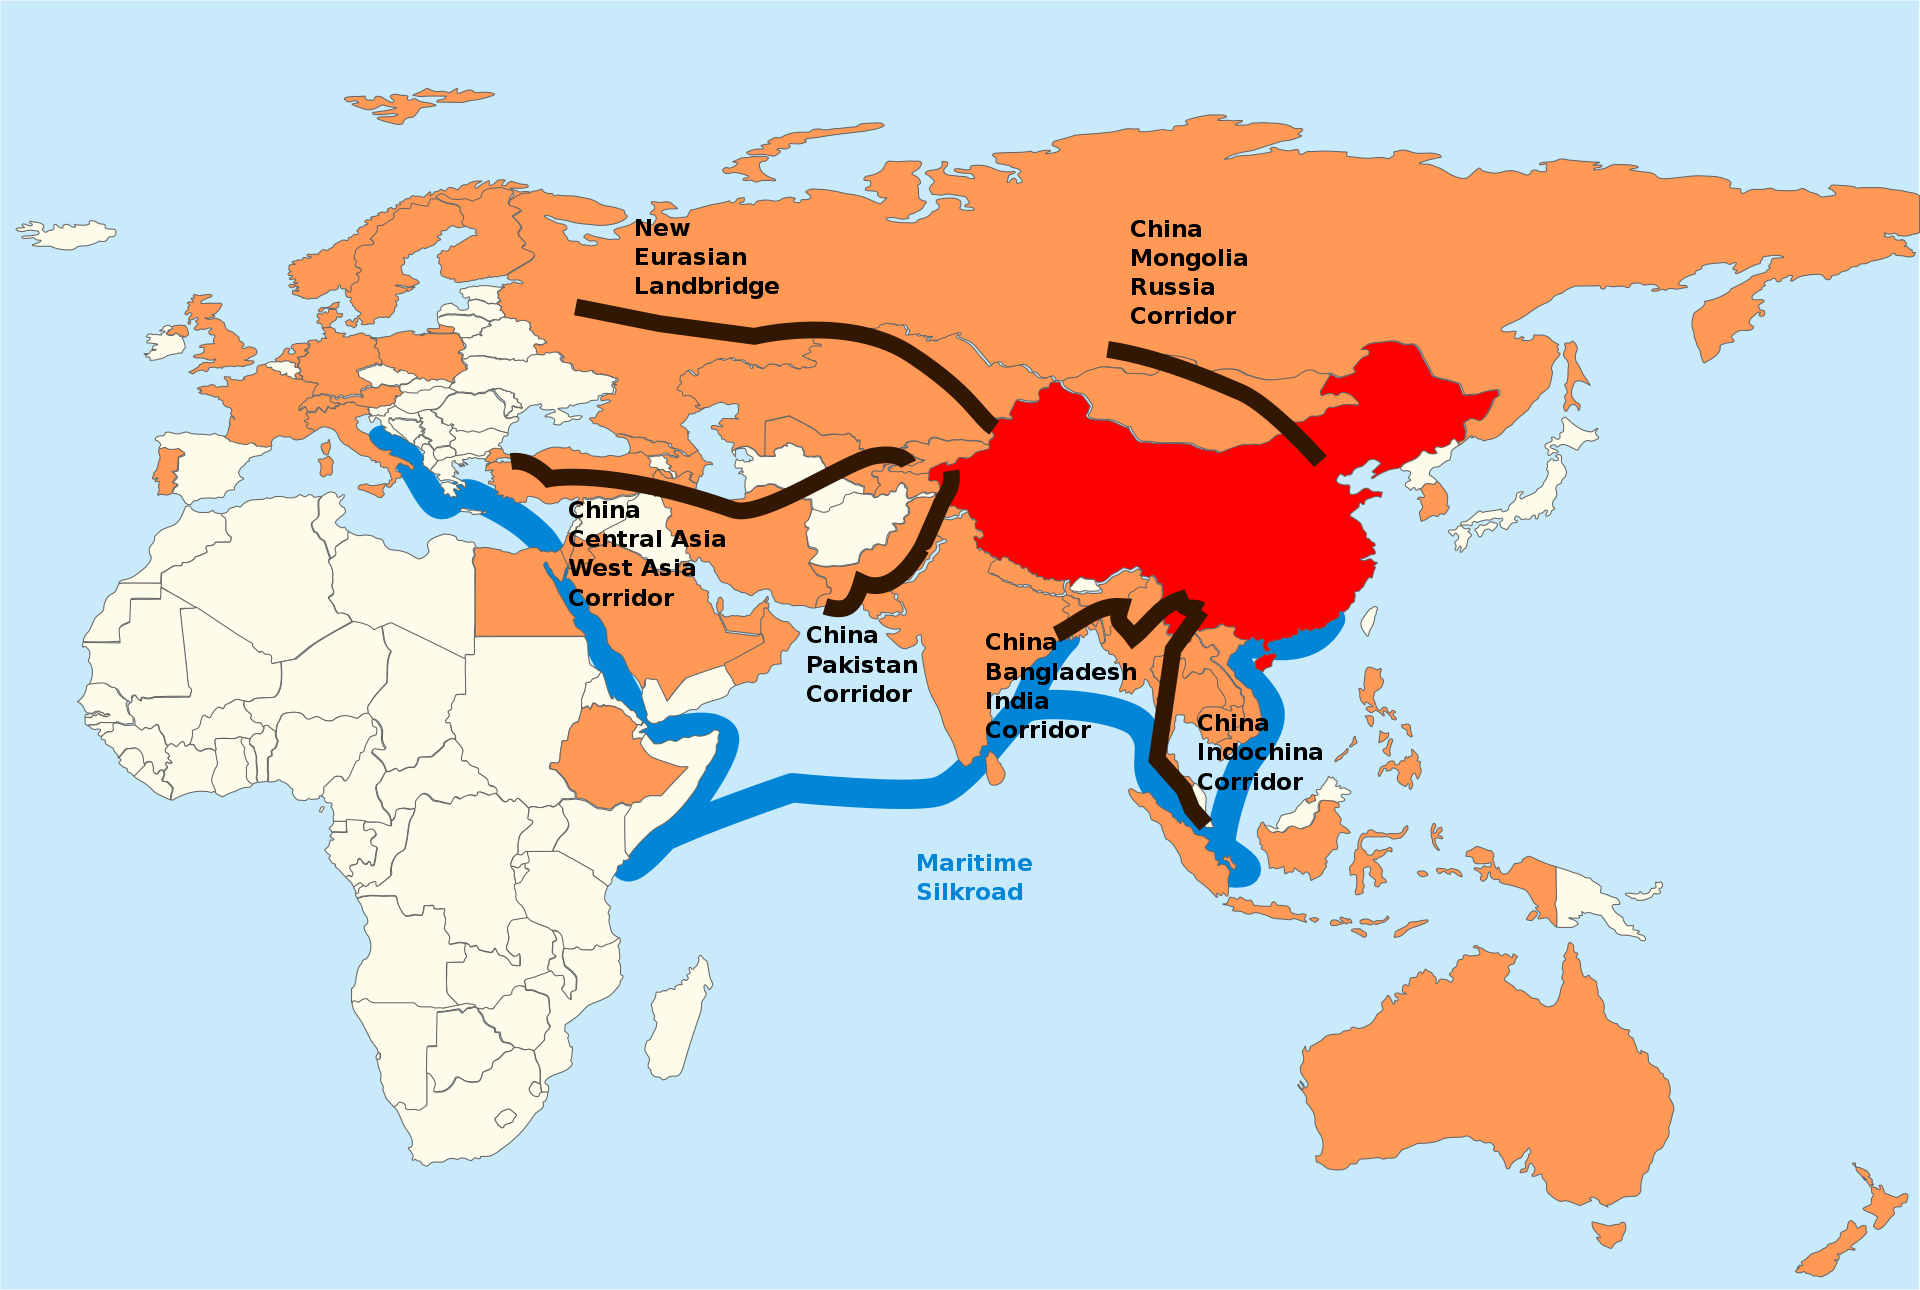 Map of Transportation routes in the Belt and Road Initiative